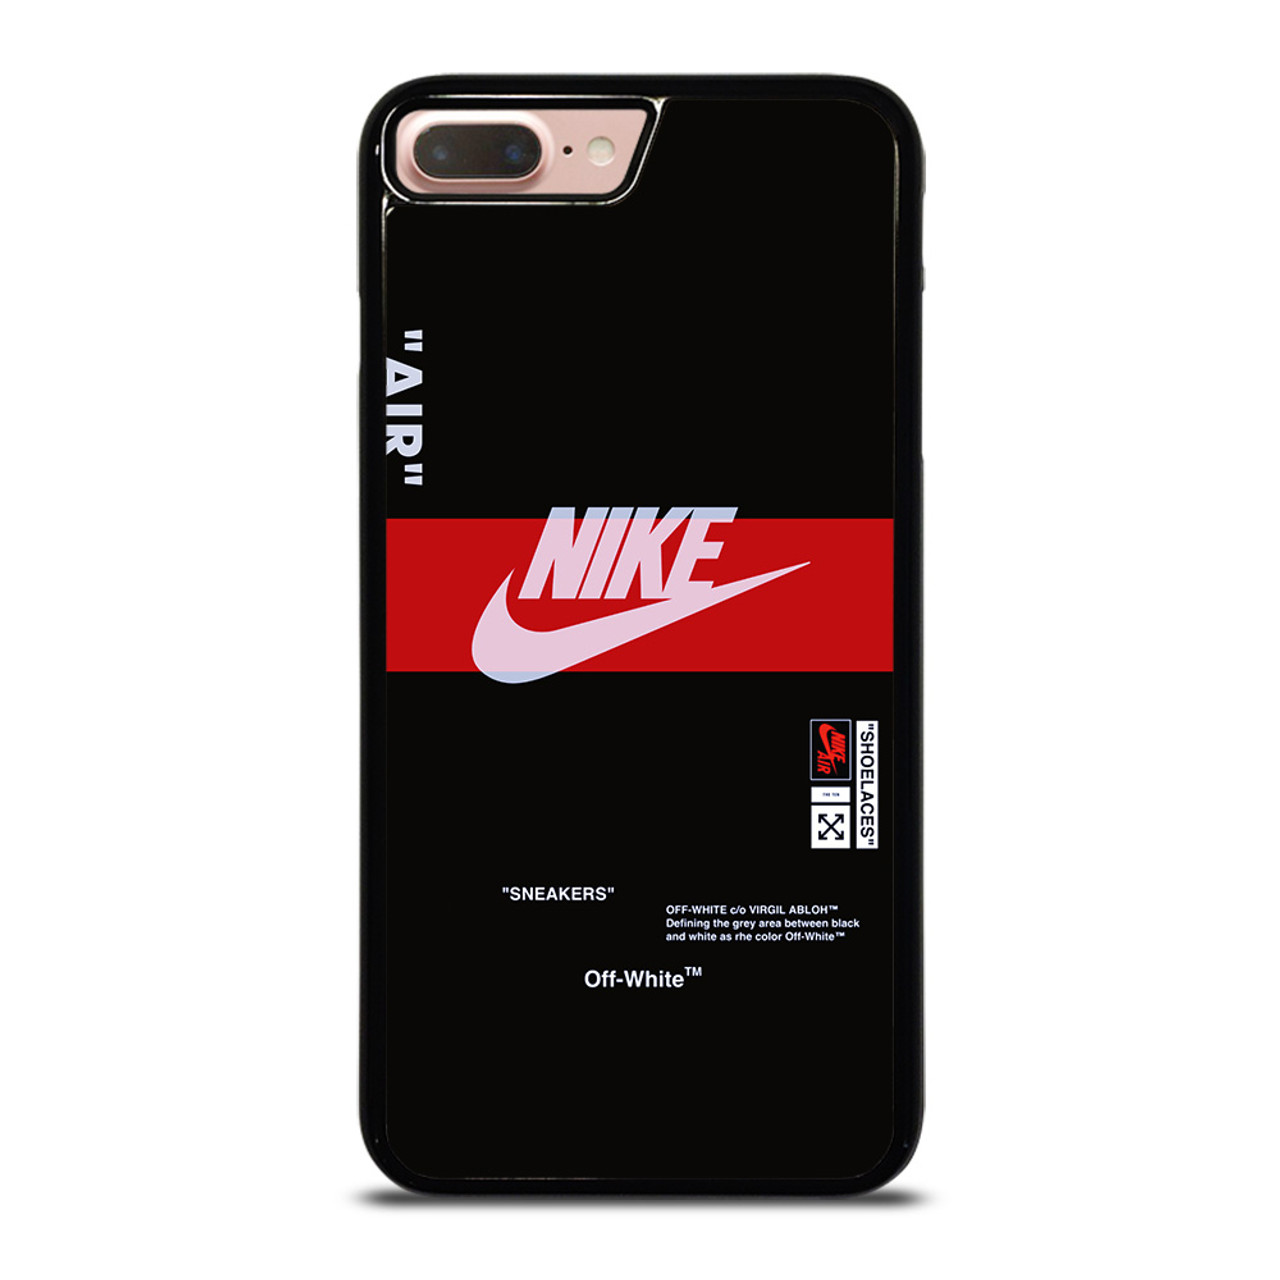 NIKE SHOES OFF WHITE iPhone 8 Plus Case 